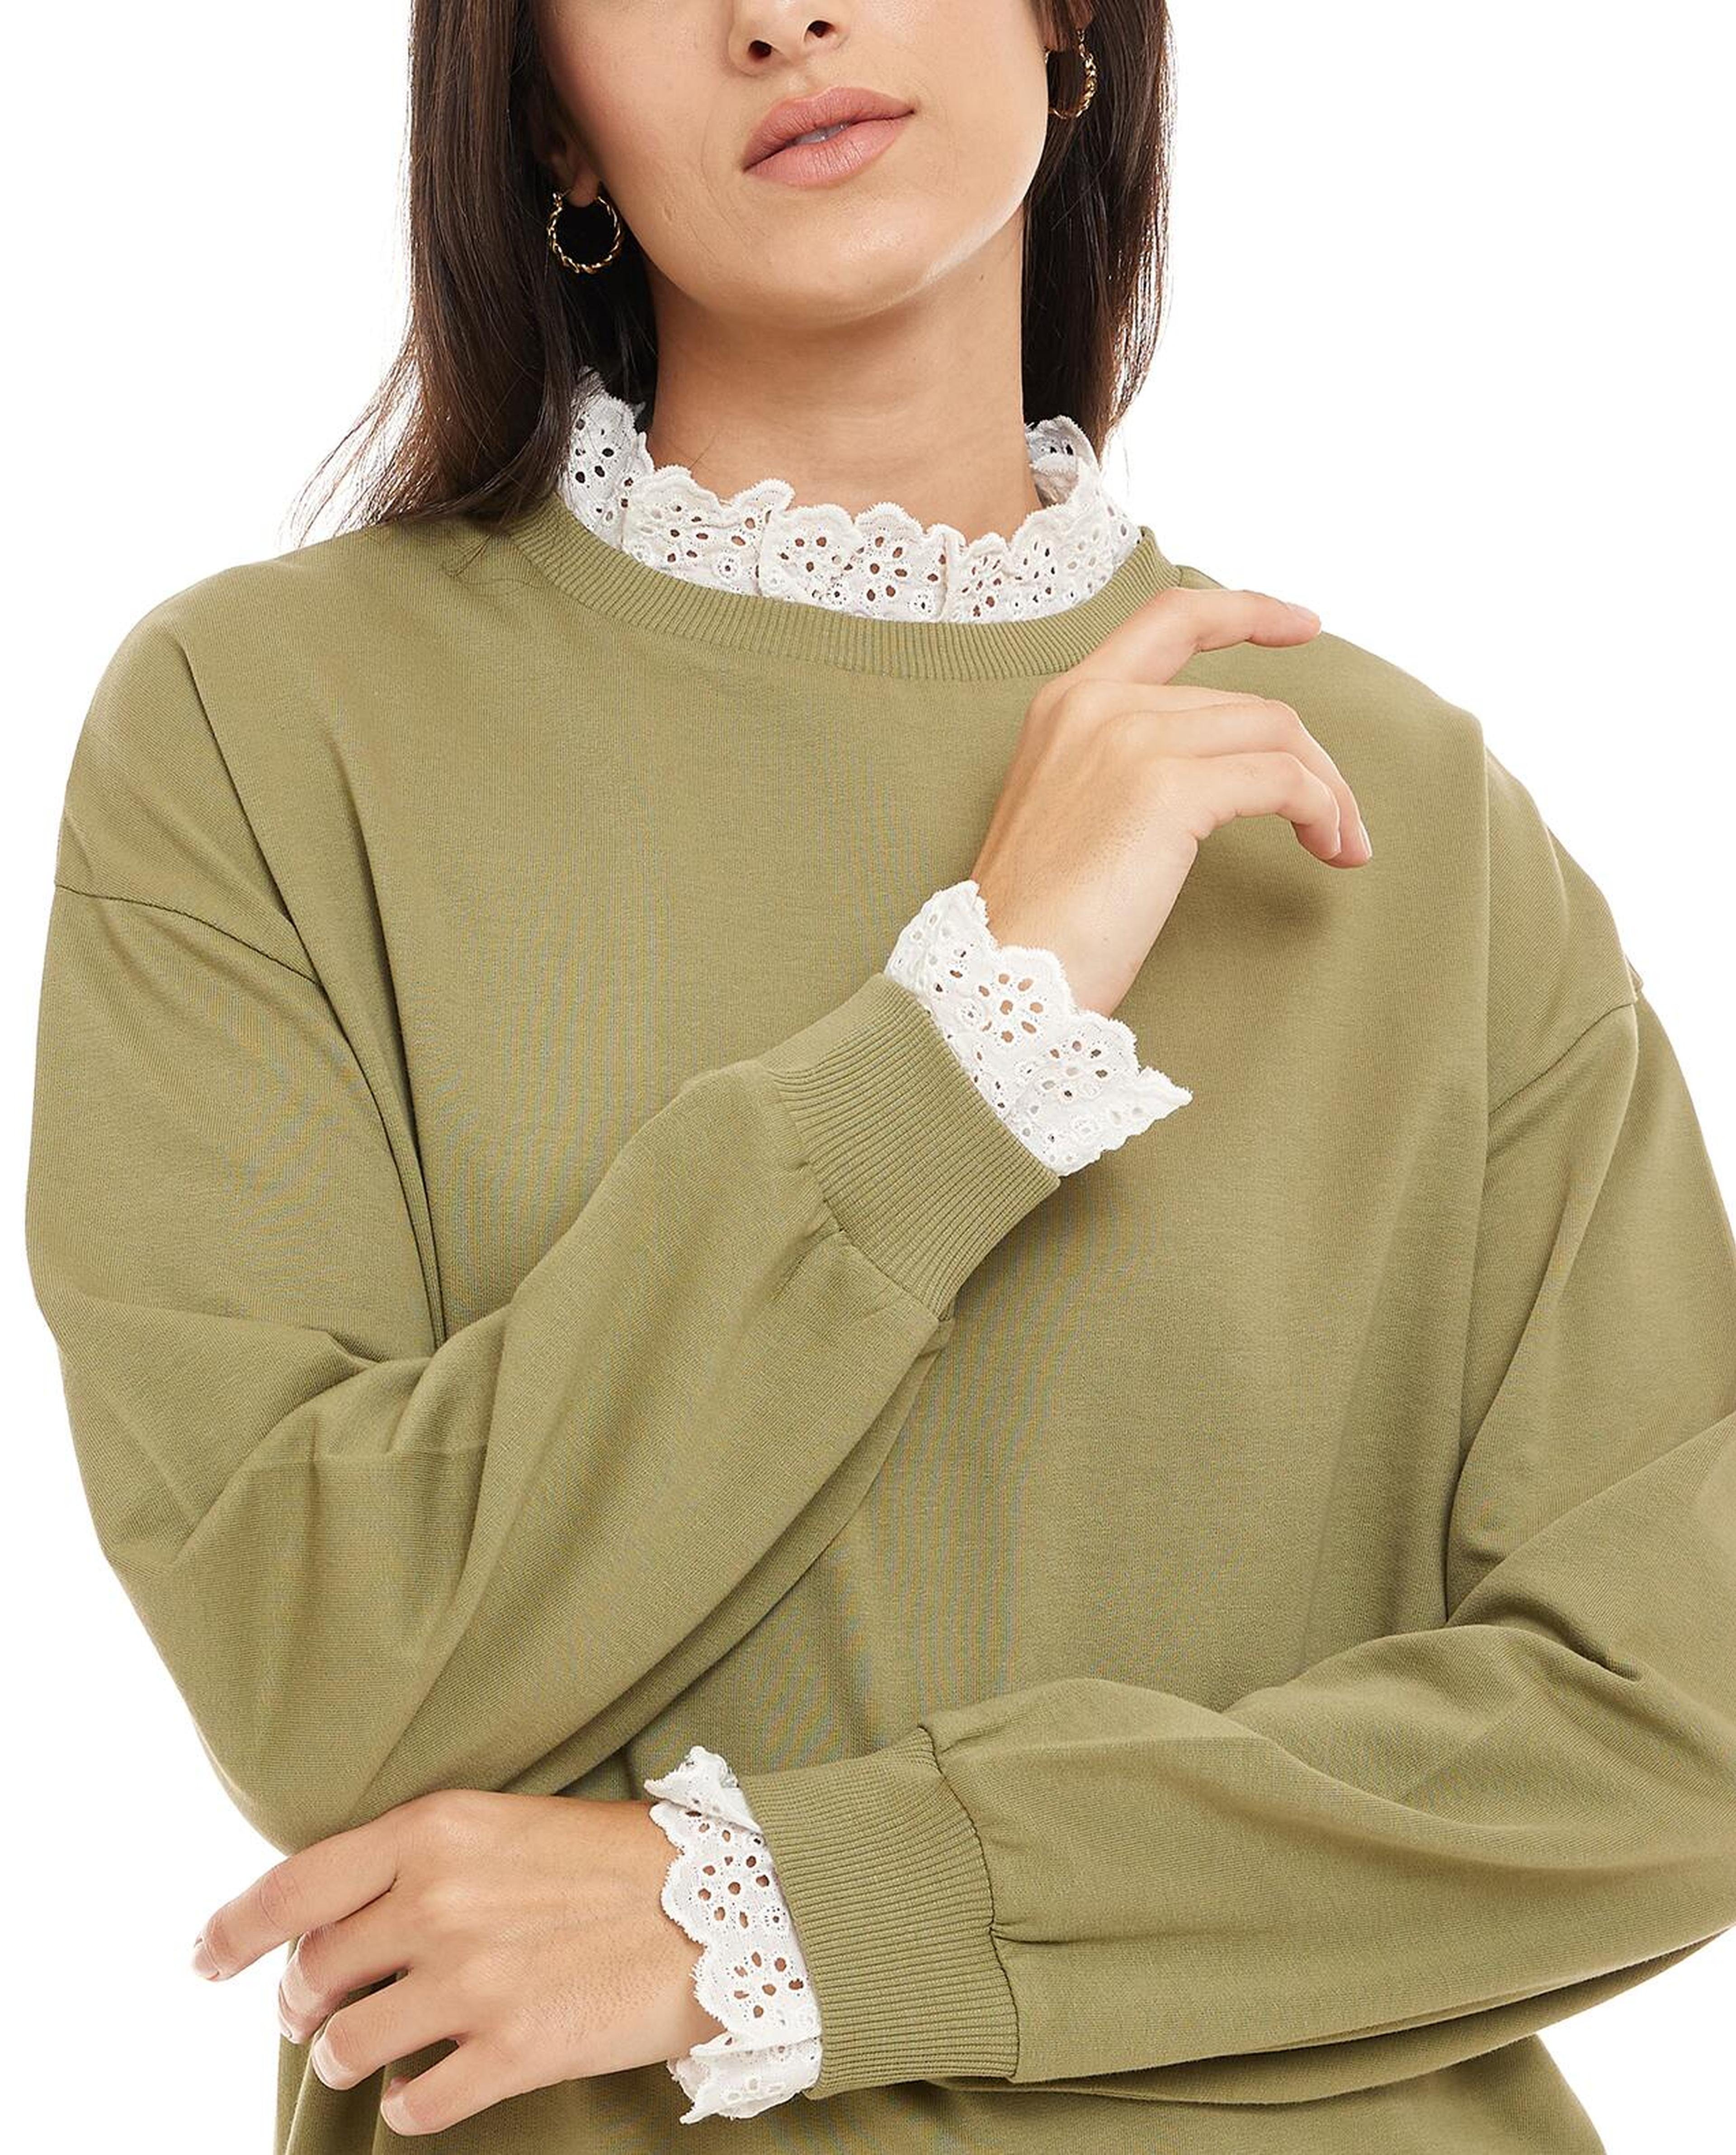 Lace Trim Sweatshirt with Long Sleeves